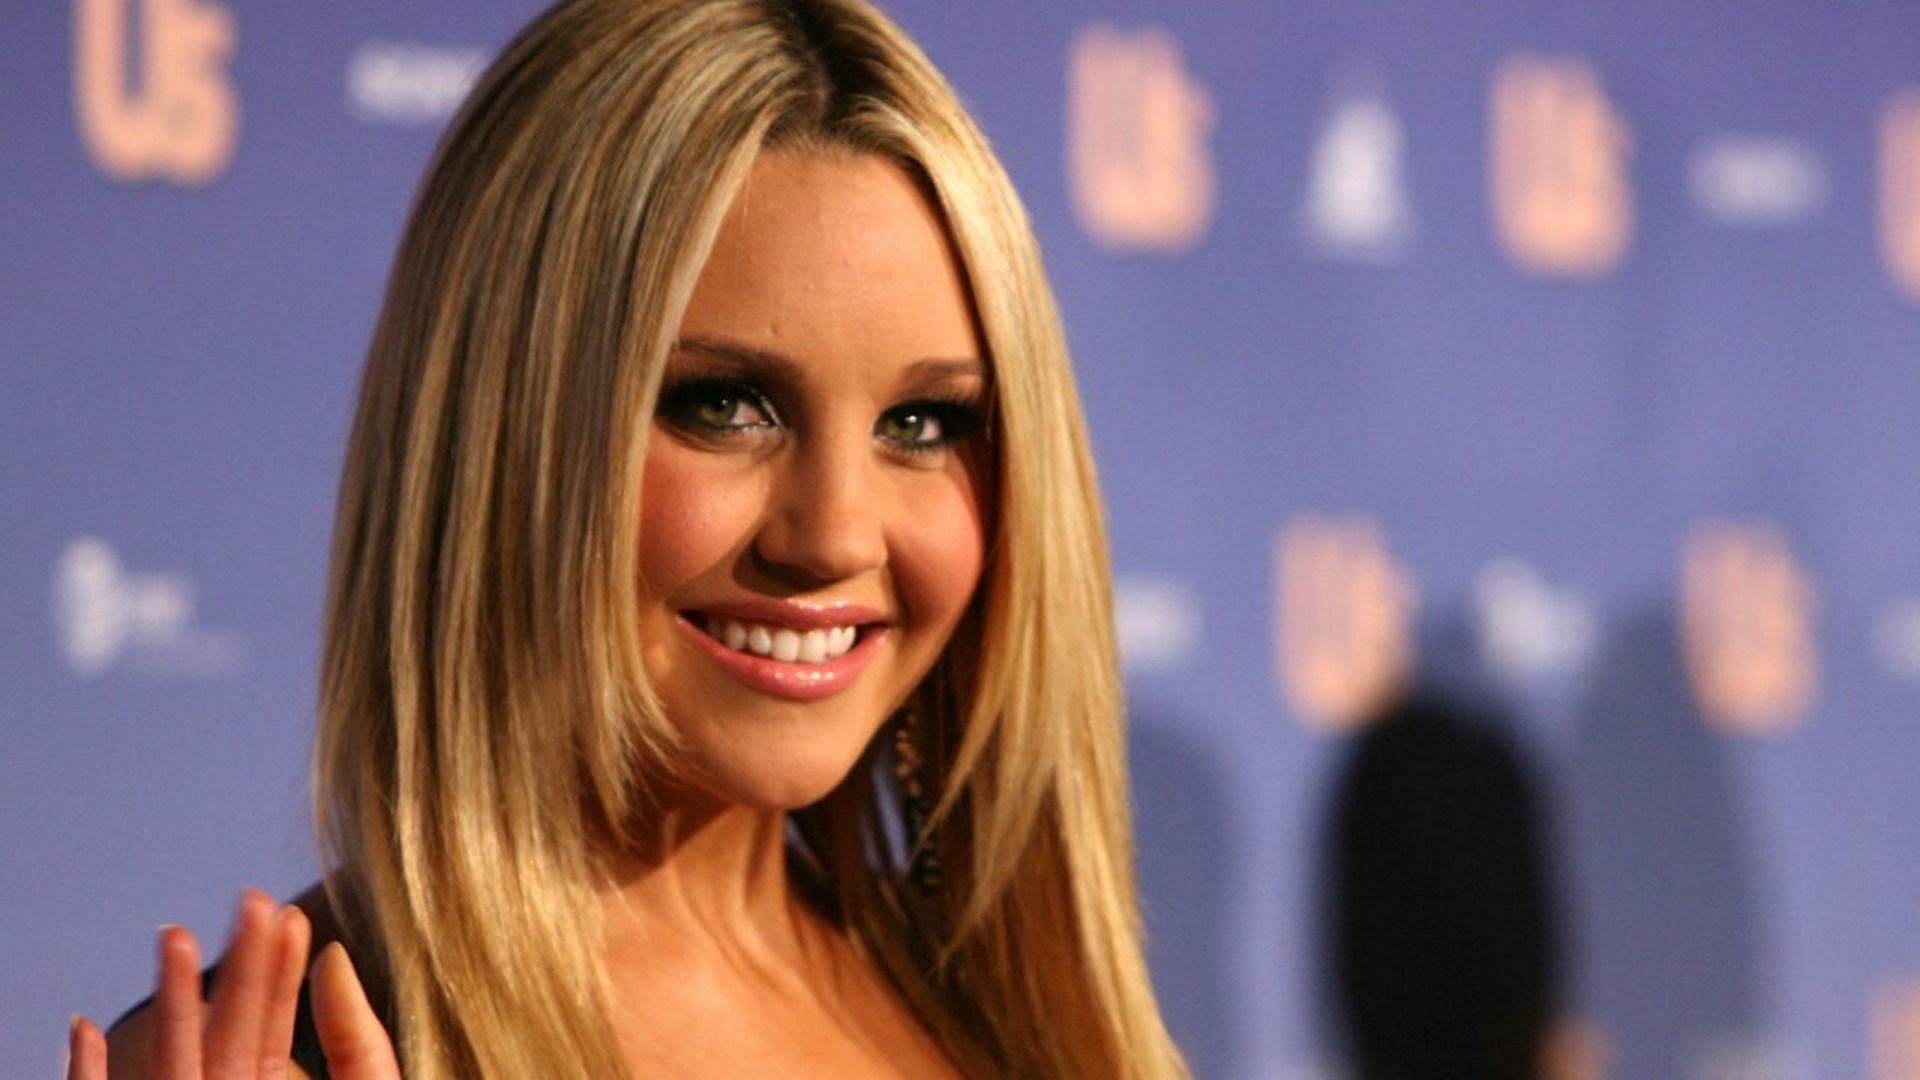 Amanda Bynes went into conservatorship in August 2013 after she showcased some &quot;erratic behavior&quot; (Image via Getty Images/ Michael Buckner)